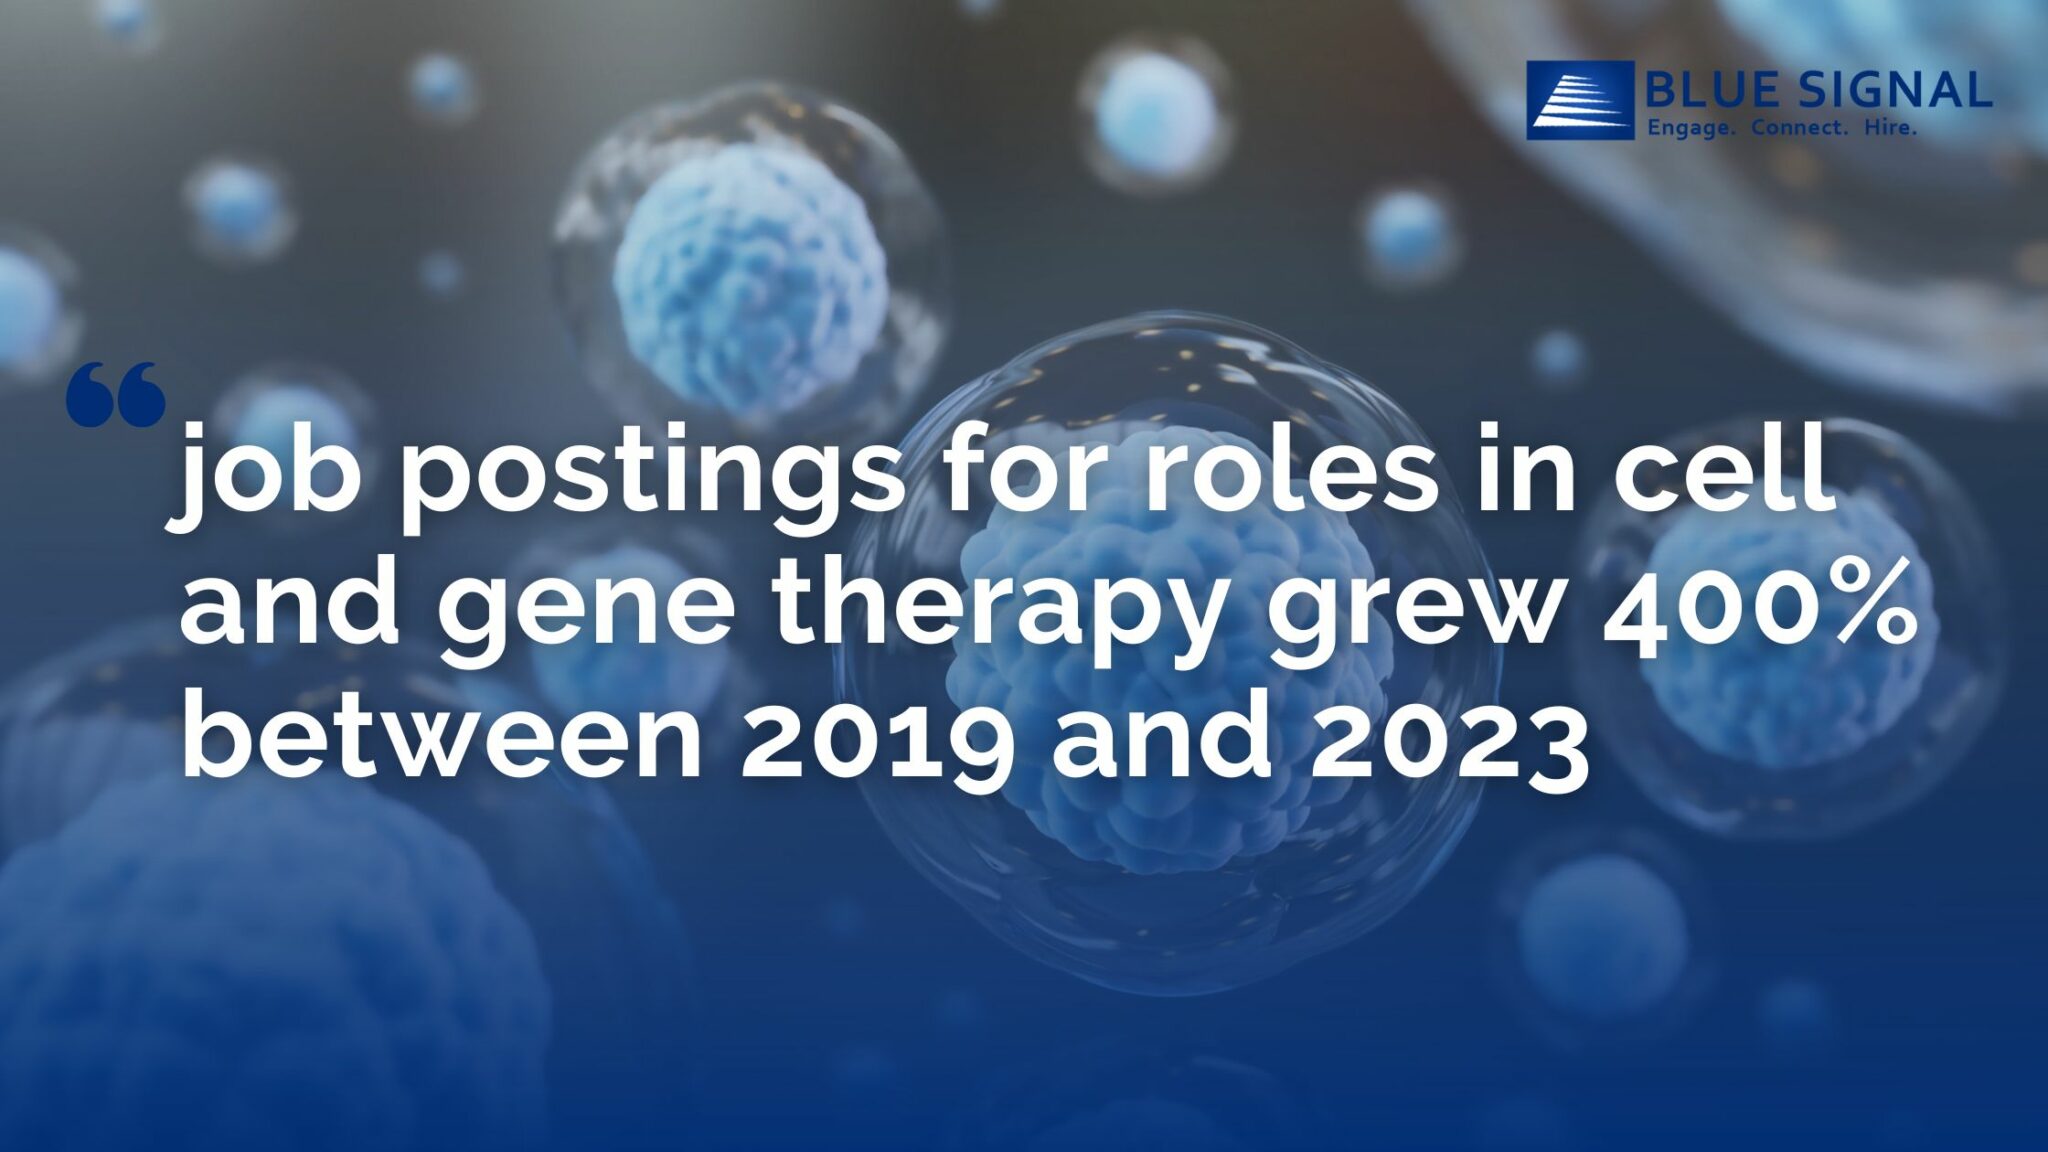 job postings for roles in cell and gene therapy grew 400% between 2019 and 2023